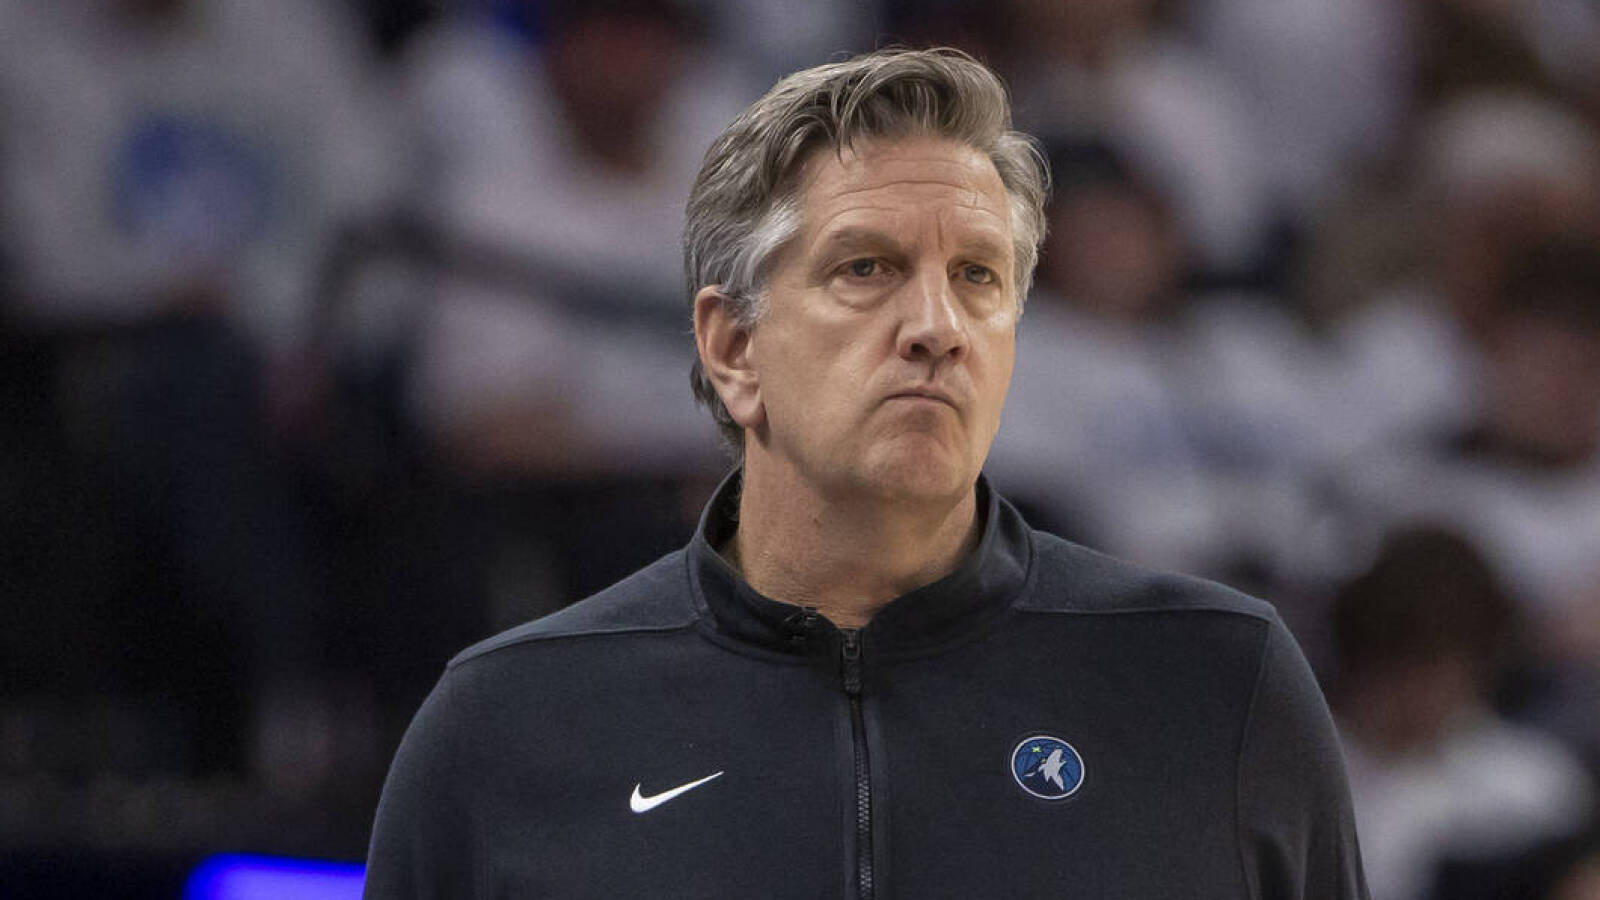 Watch: Timberwolves HC Chris Finch suffers injury in sideline collision